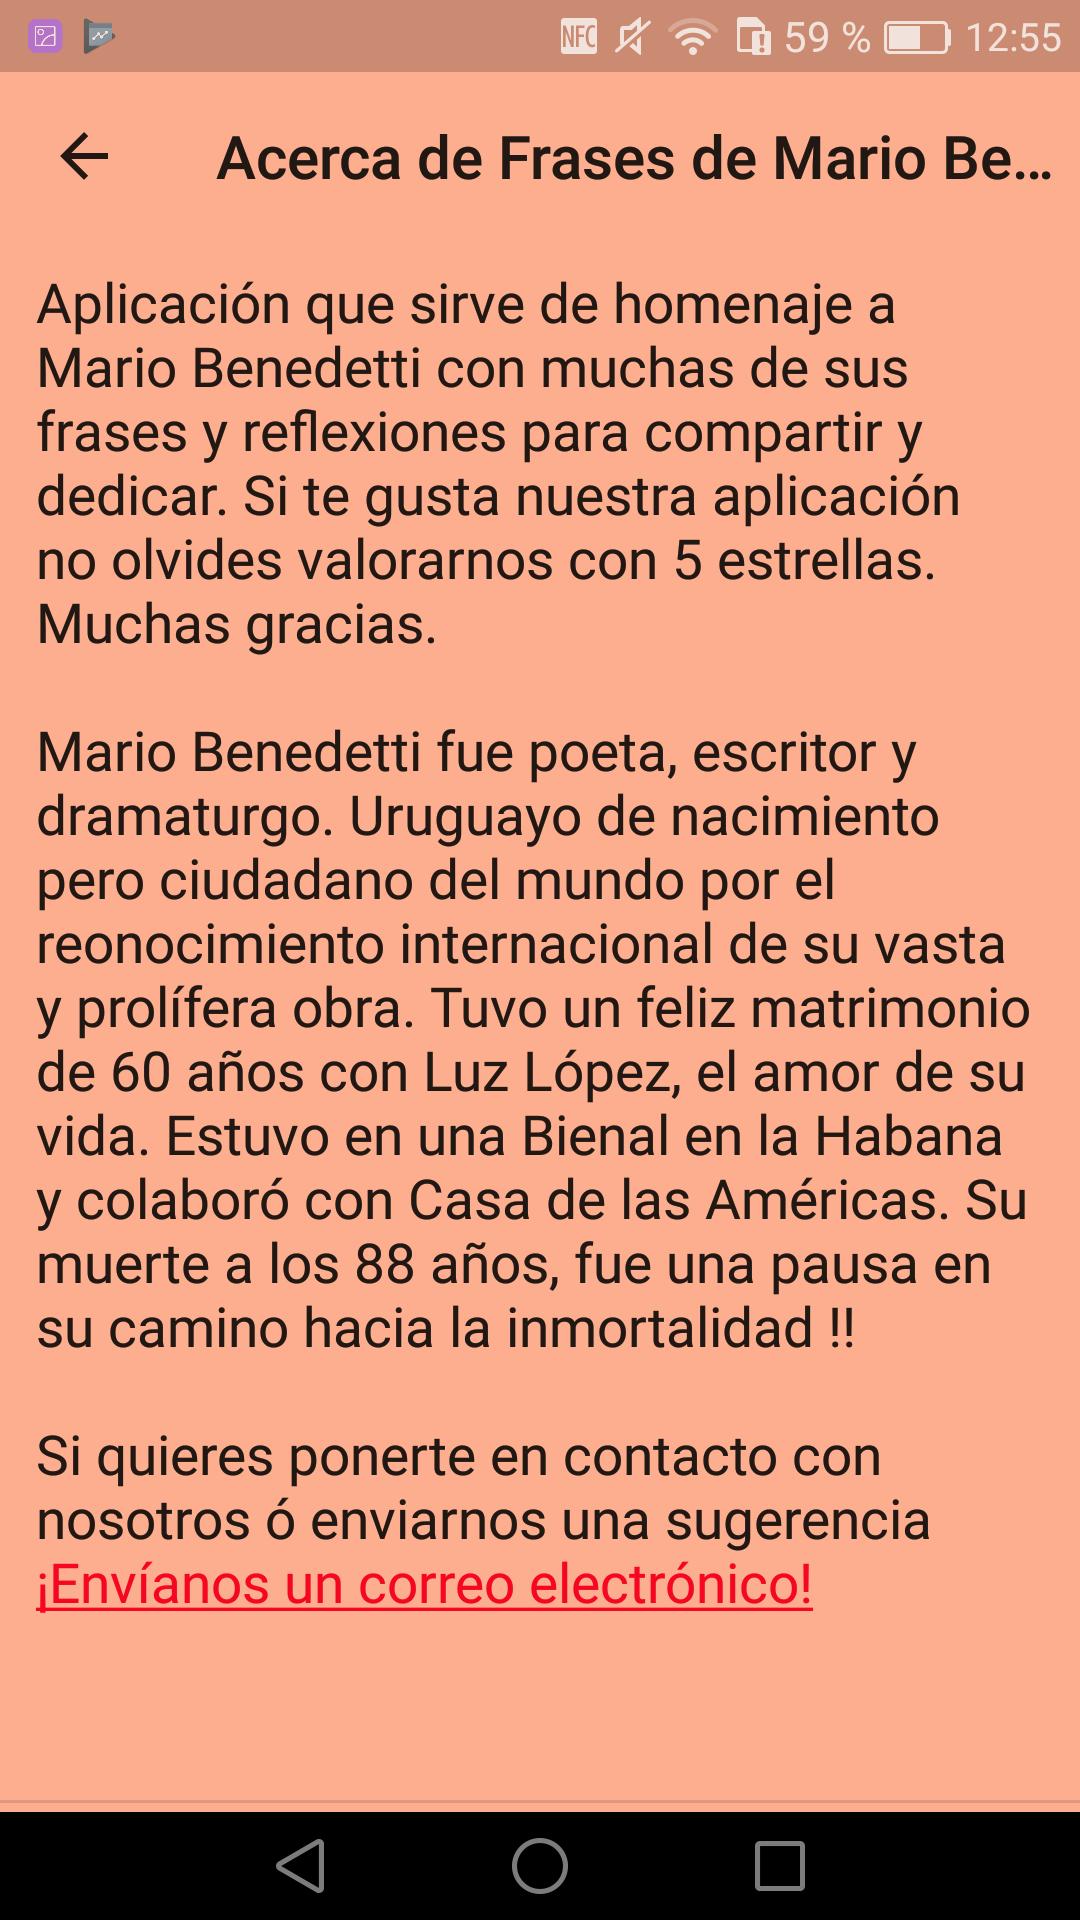 Frases de Mario Benedetti for Android - APK Download